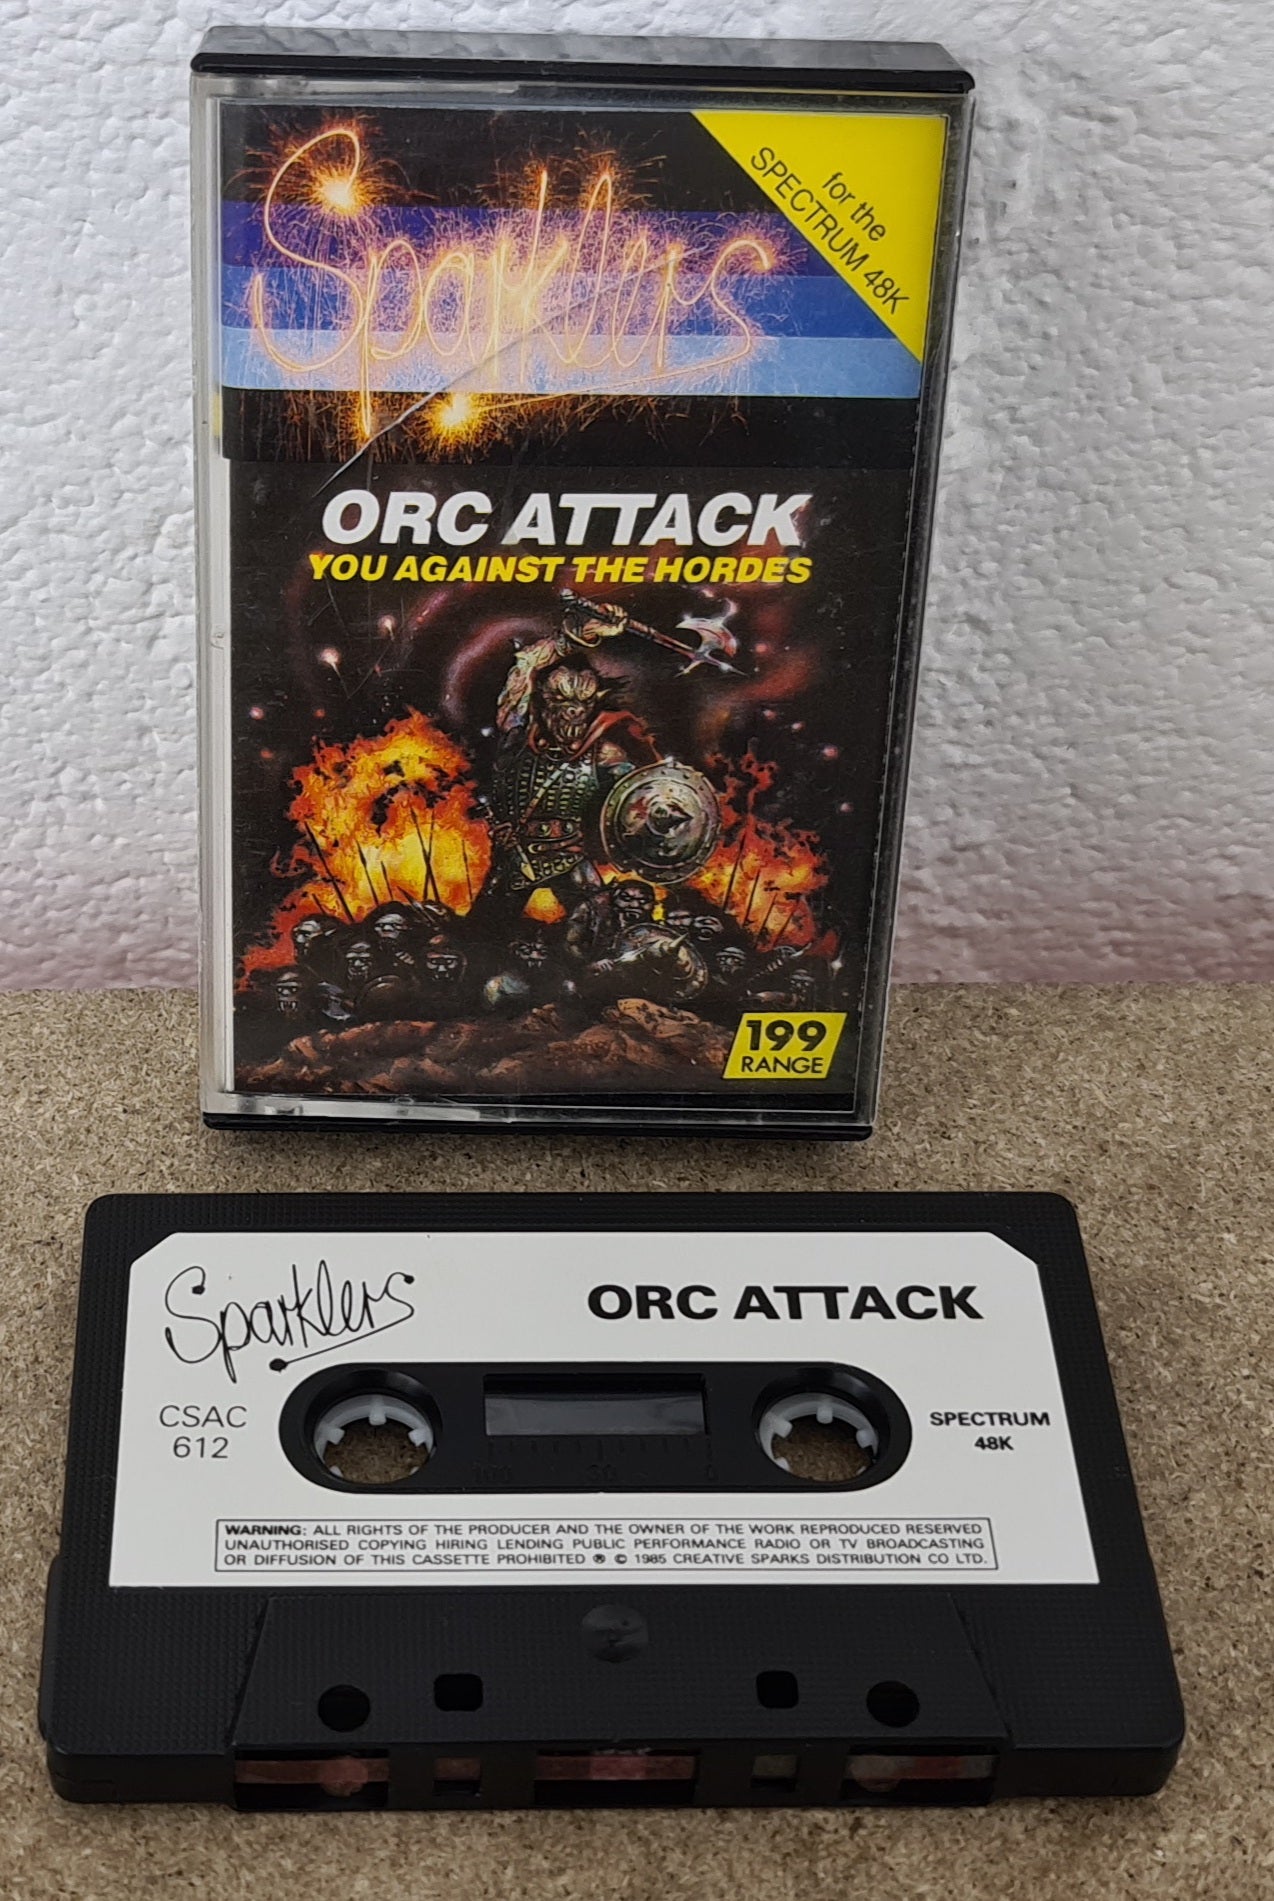 Orc Attack ZX Spectrum Game